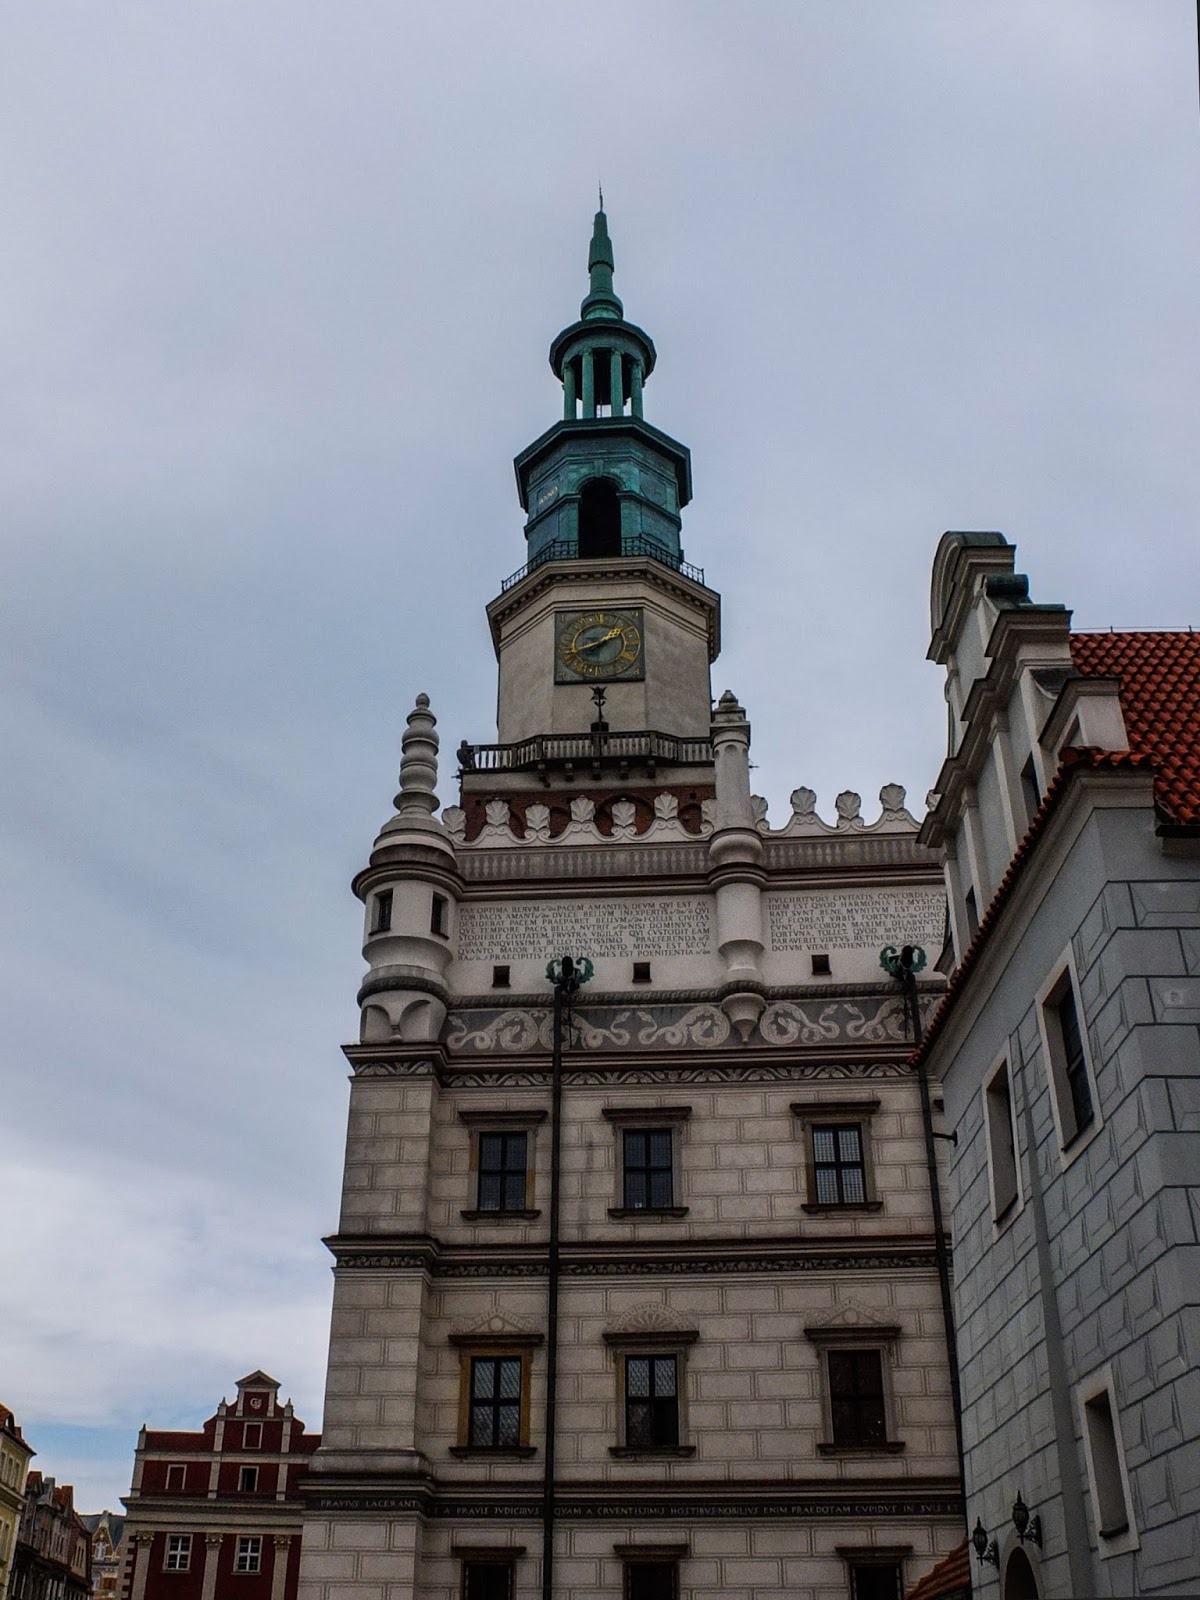 A view of the Town Hall tower in Poznań Maret Square.